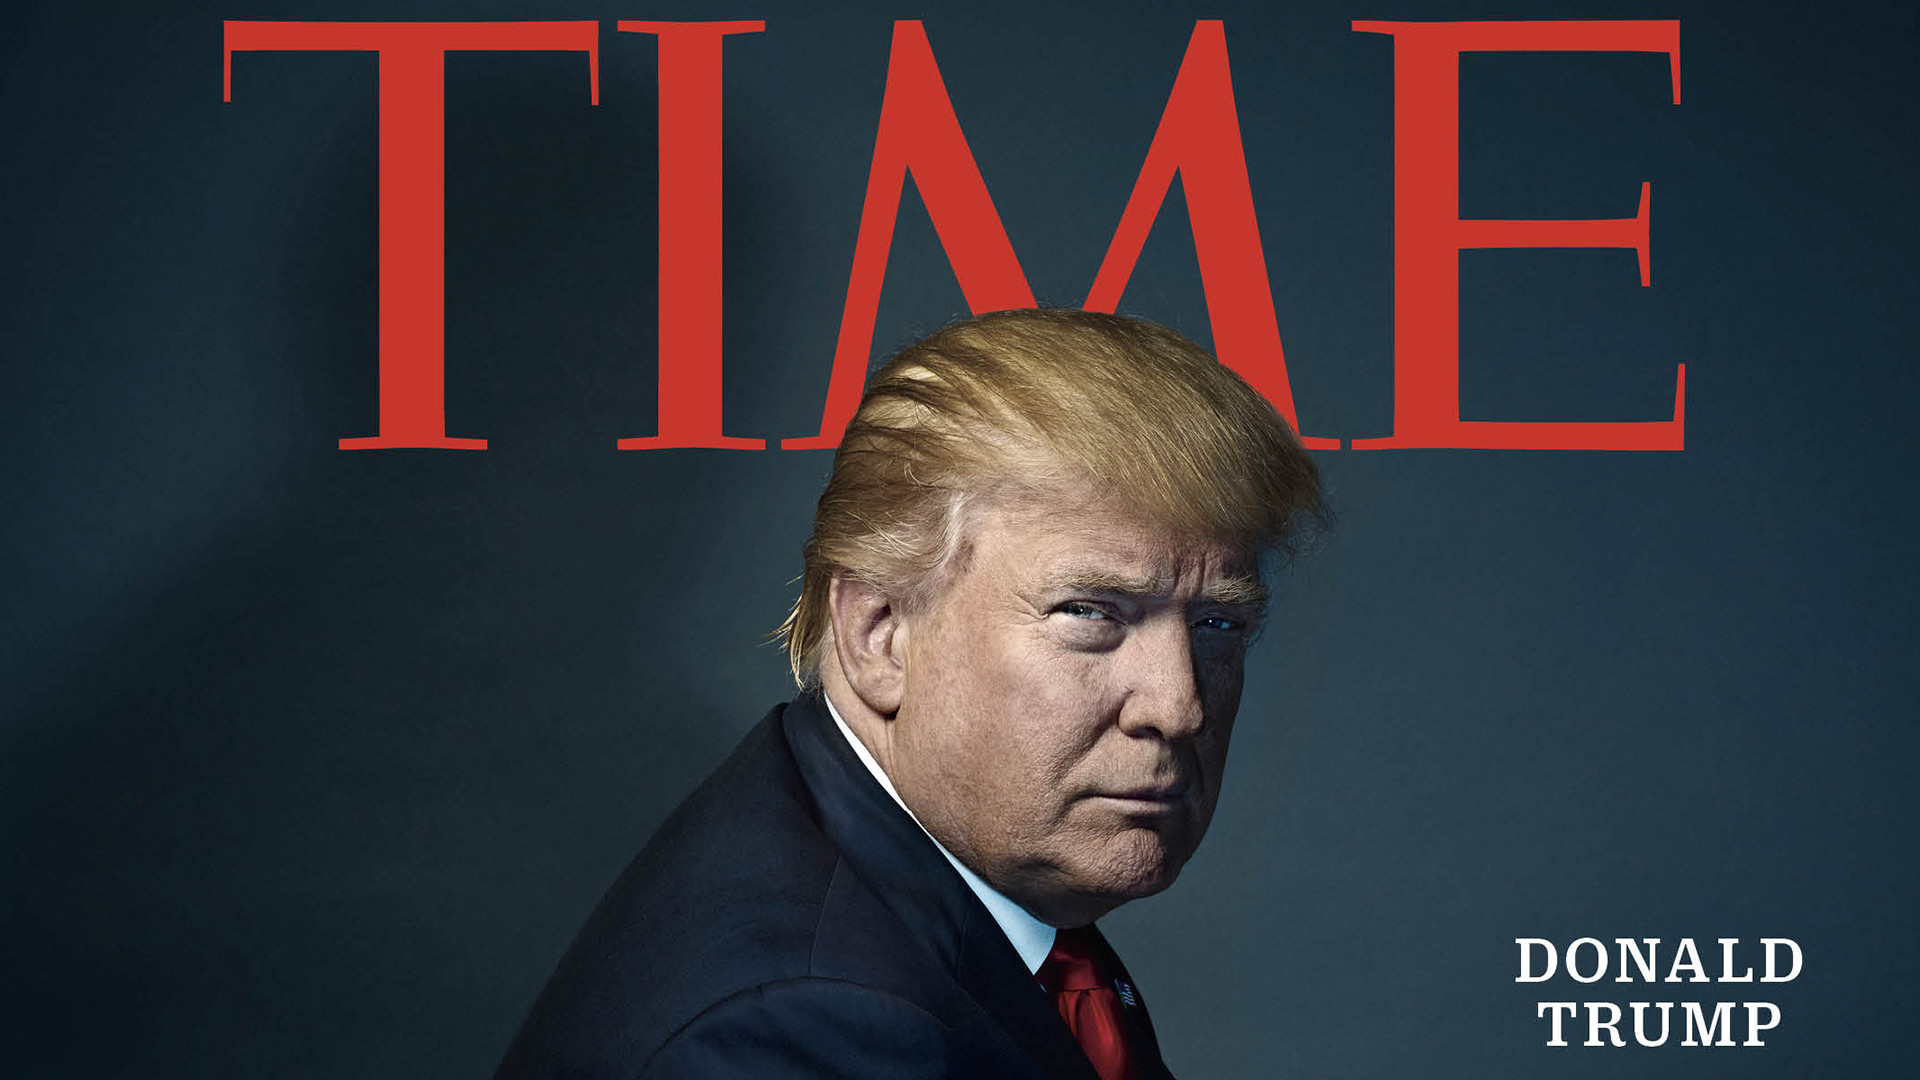 President elect Donald Trump is TIME Person of the Year for 2016 – TODAY.com